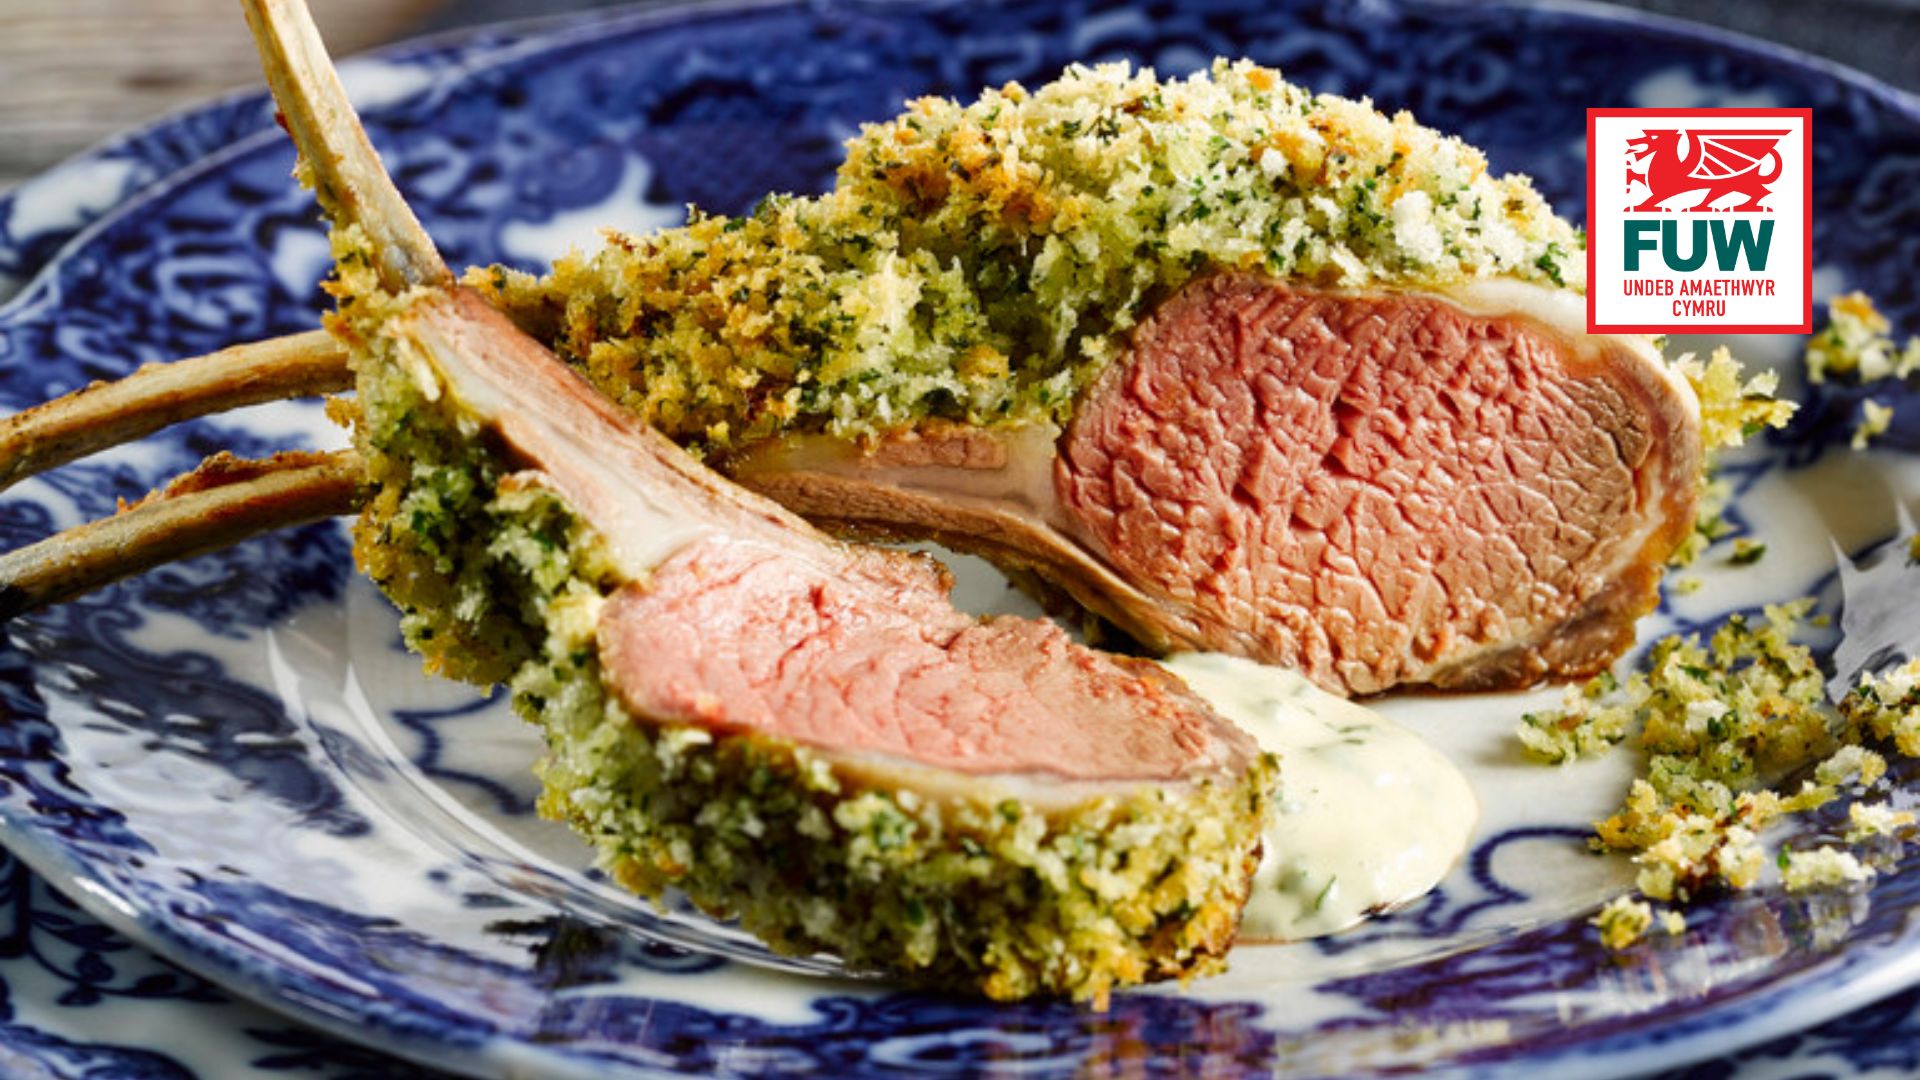 Make Welsh lamb the star of your week